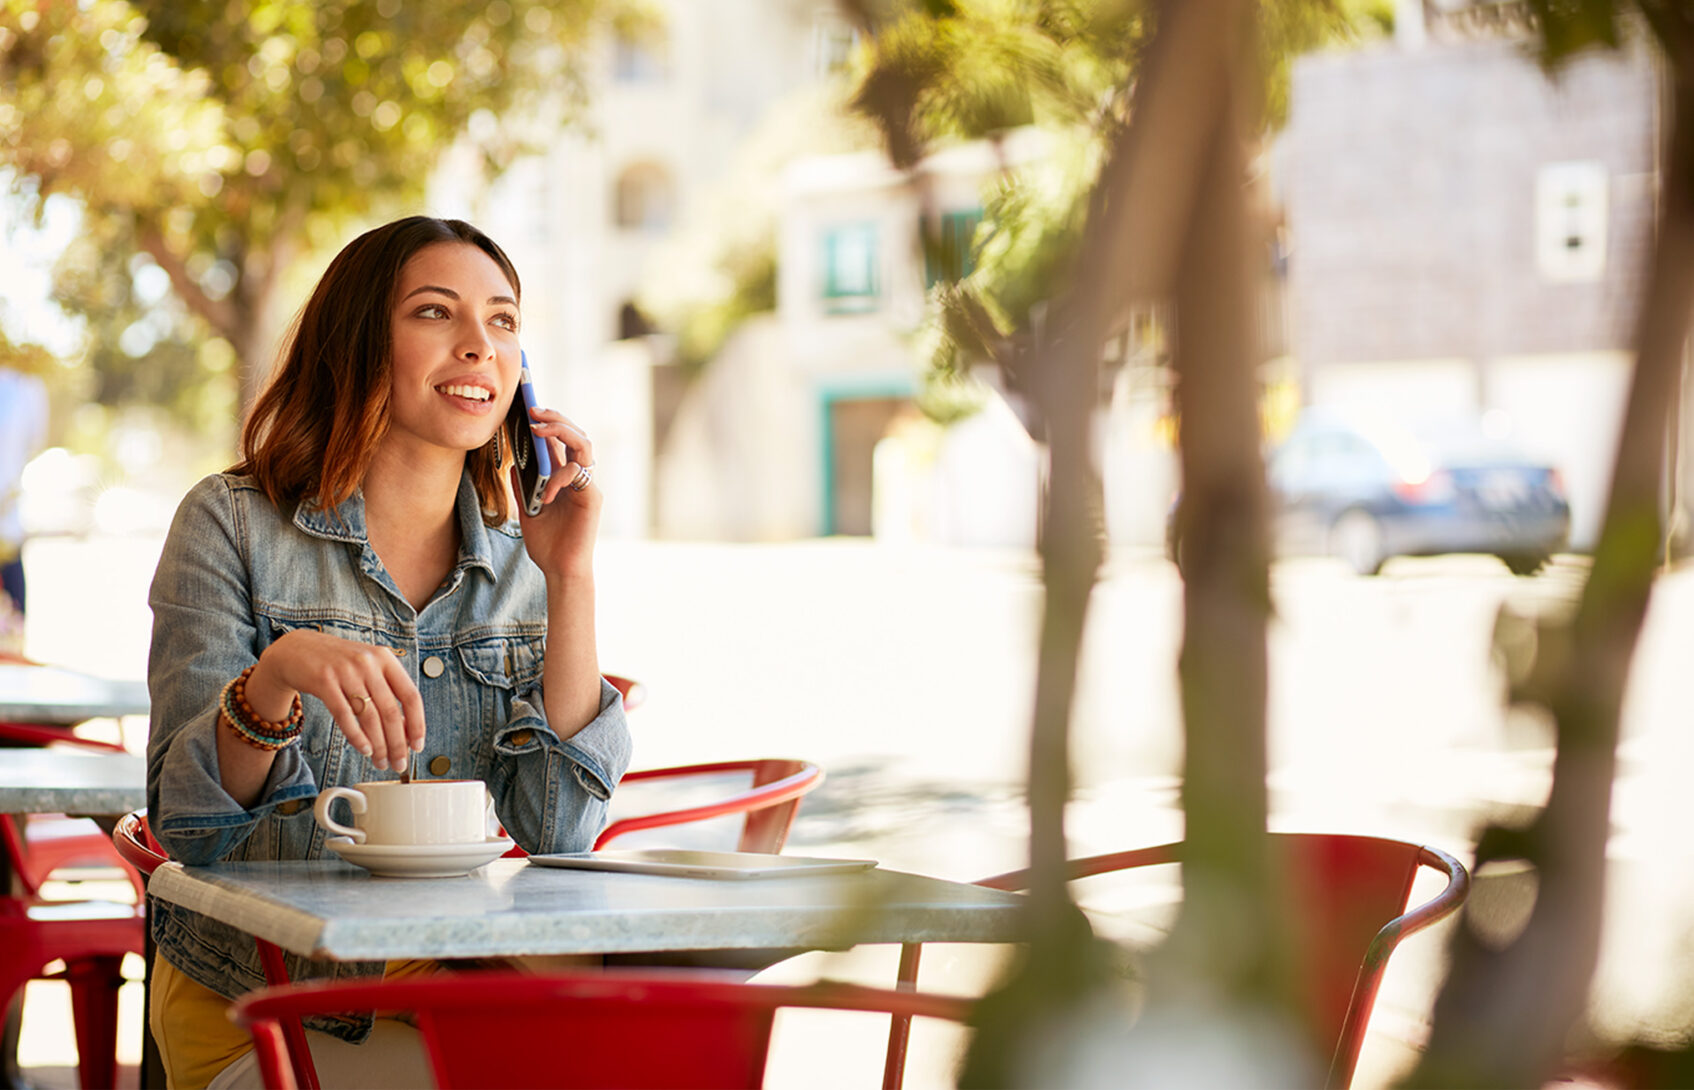 A young woman is sitting at a patio table, stirring her coffee while talking on a cell phone.